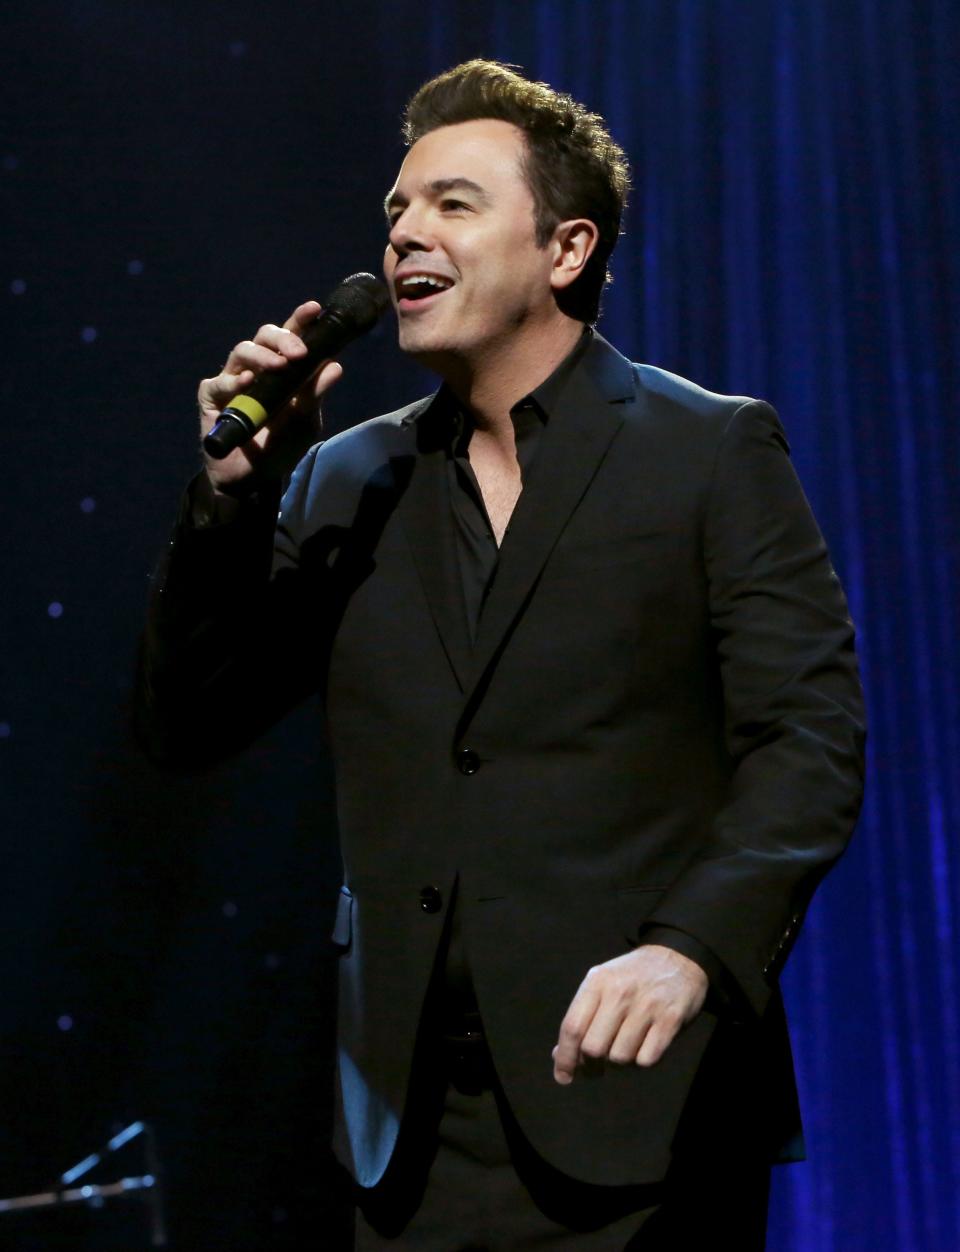 "Family Guy" creator, animator, actor and singer Seth MacFarlane will perform with Liz Gillies at the McCallum Theatre in Palm Desert, Calif., on Dec. 5, 2023.